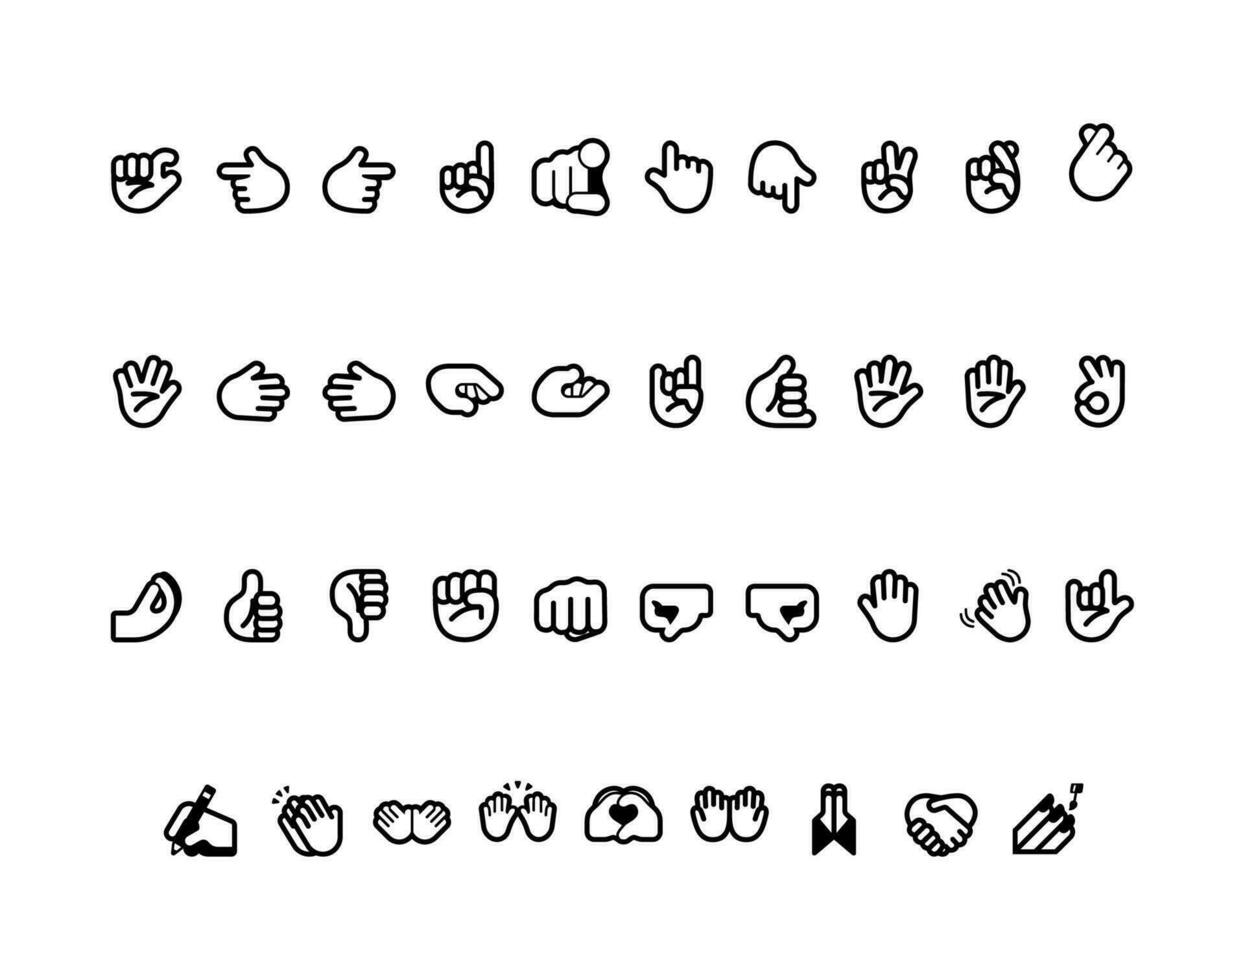 Set of hand gestures Icons. Simple line art style icons pack. vector